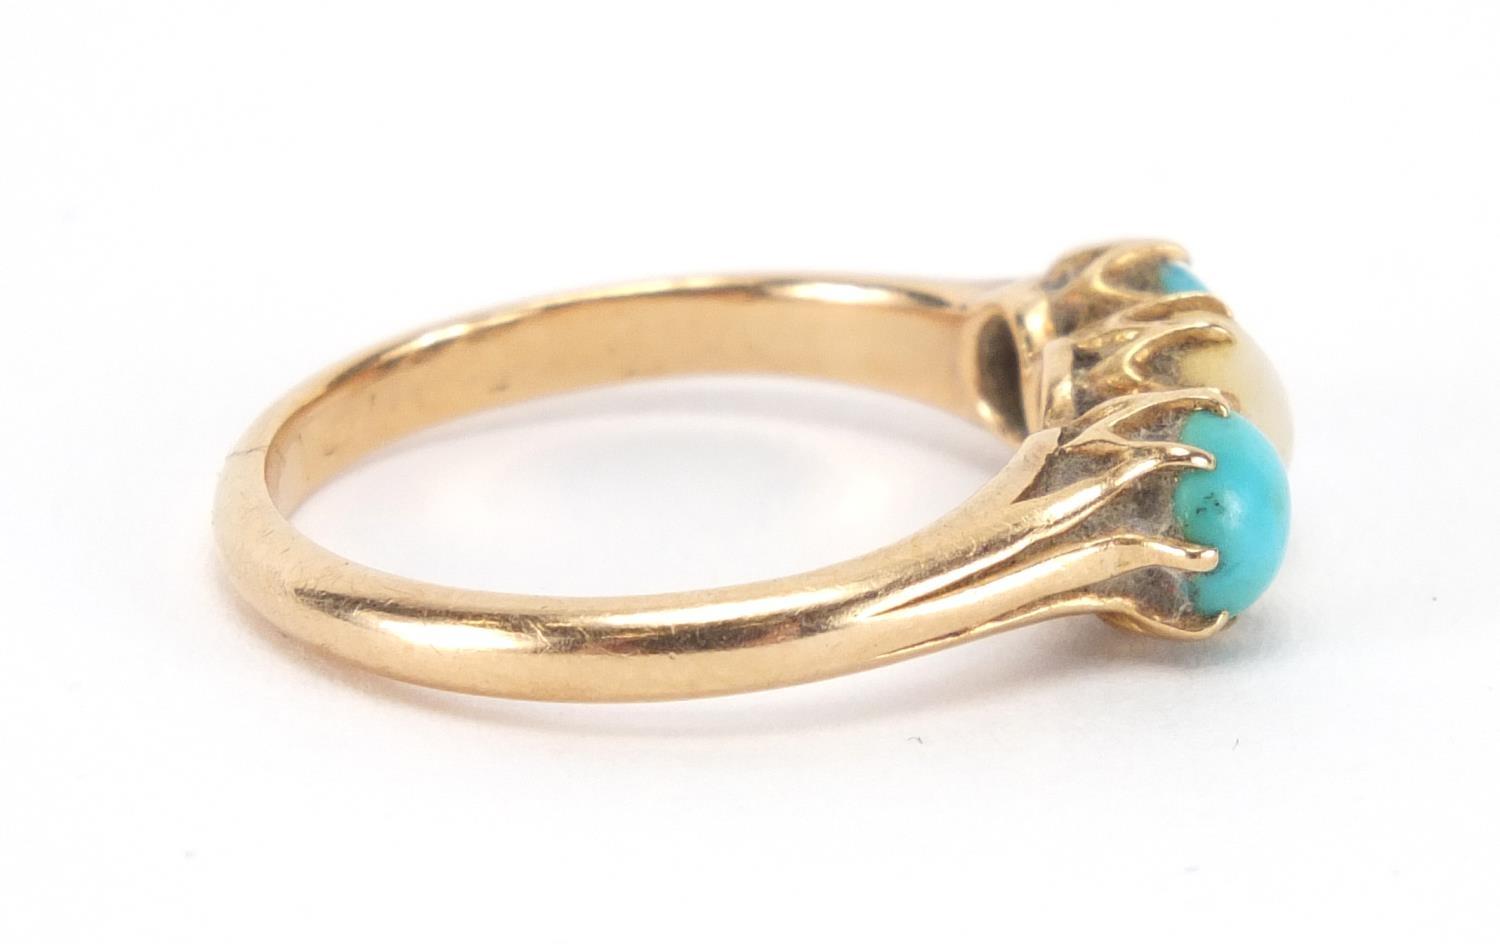 18ct gold pearl and turquoise ring, size M, approximate weight 3.3g : For Extra Condition Reports - Image 4 of 6